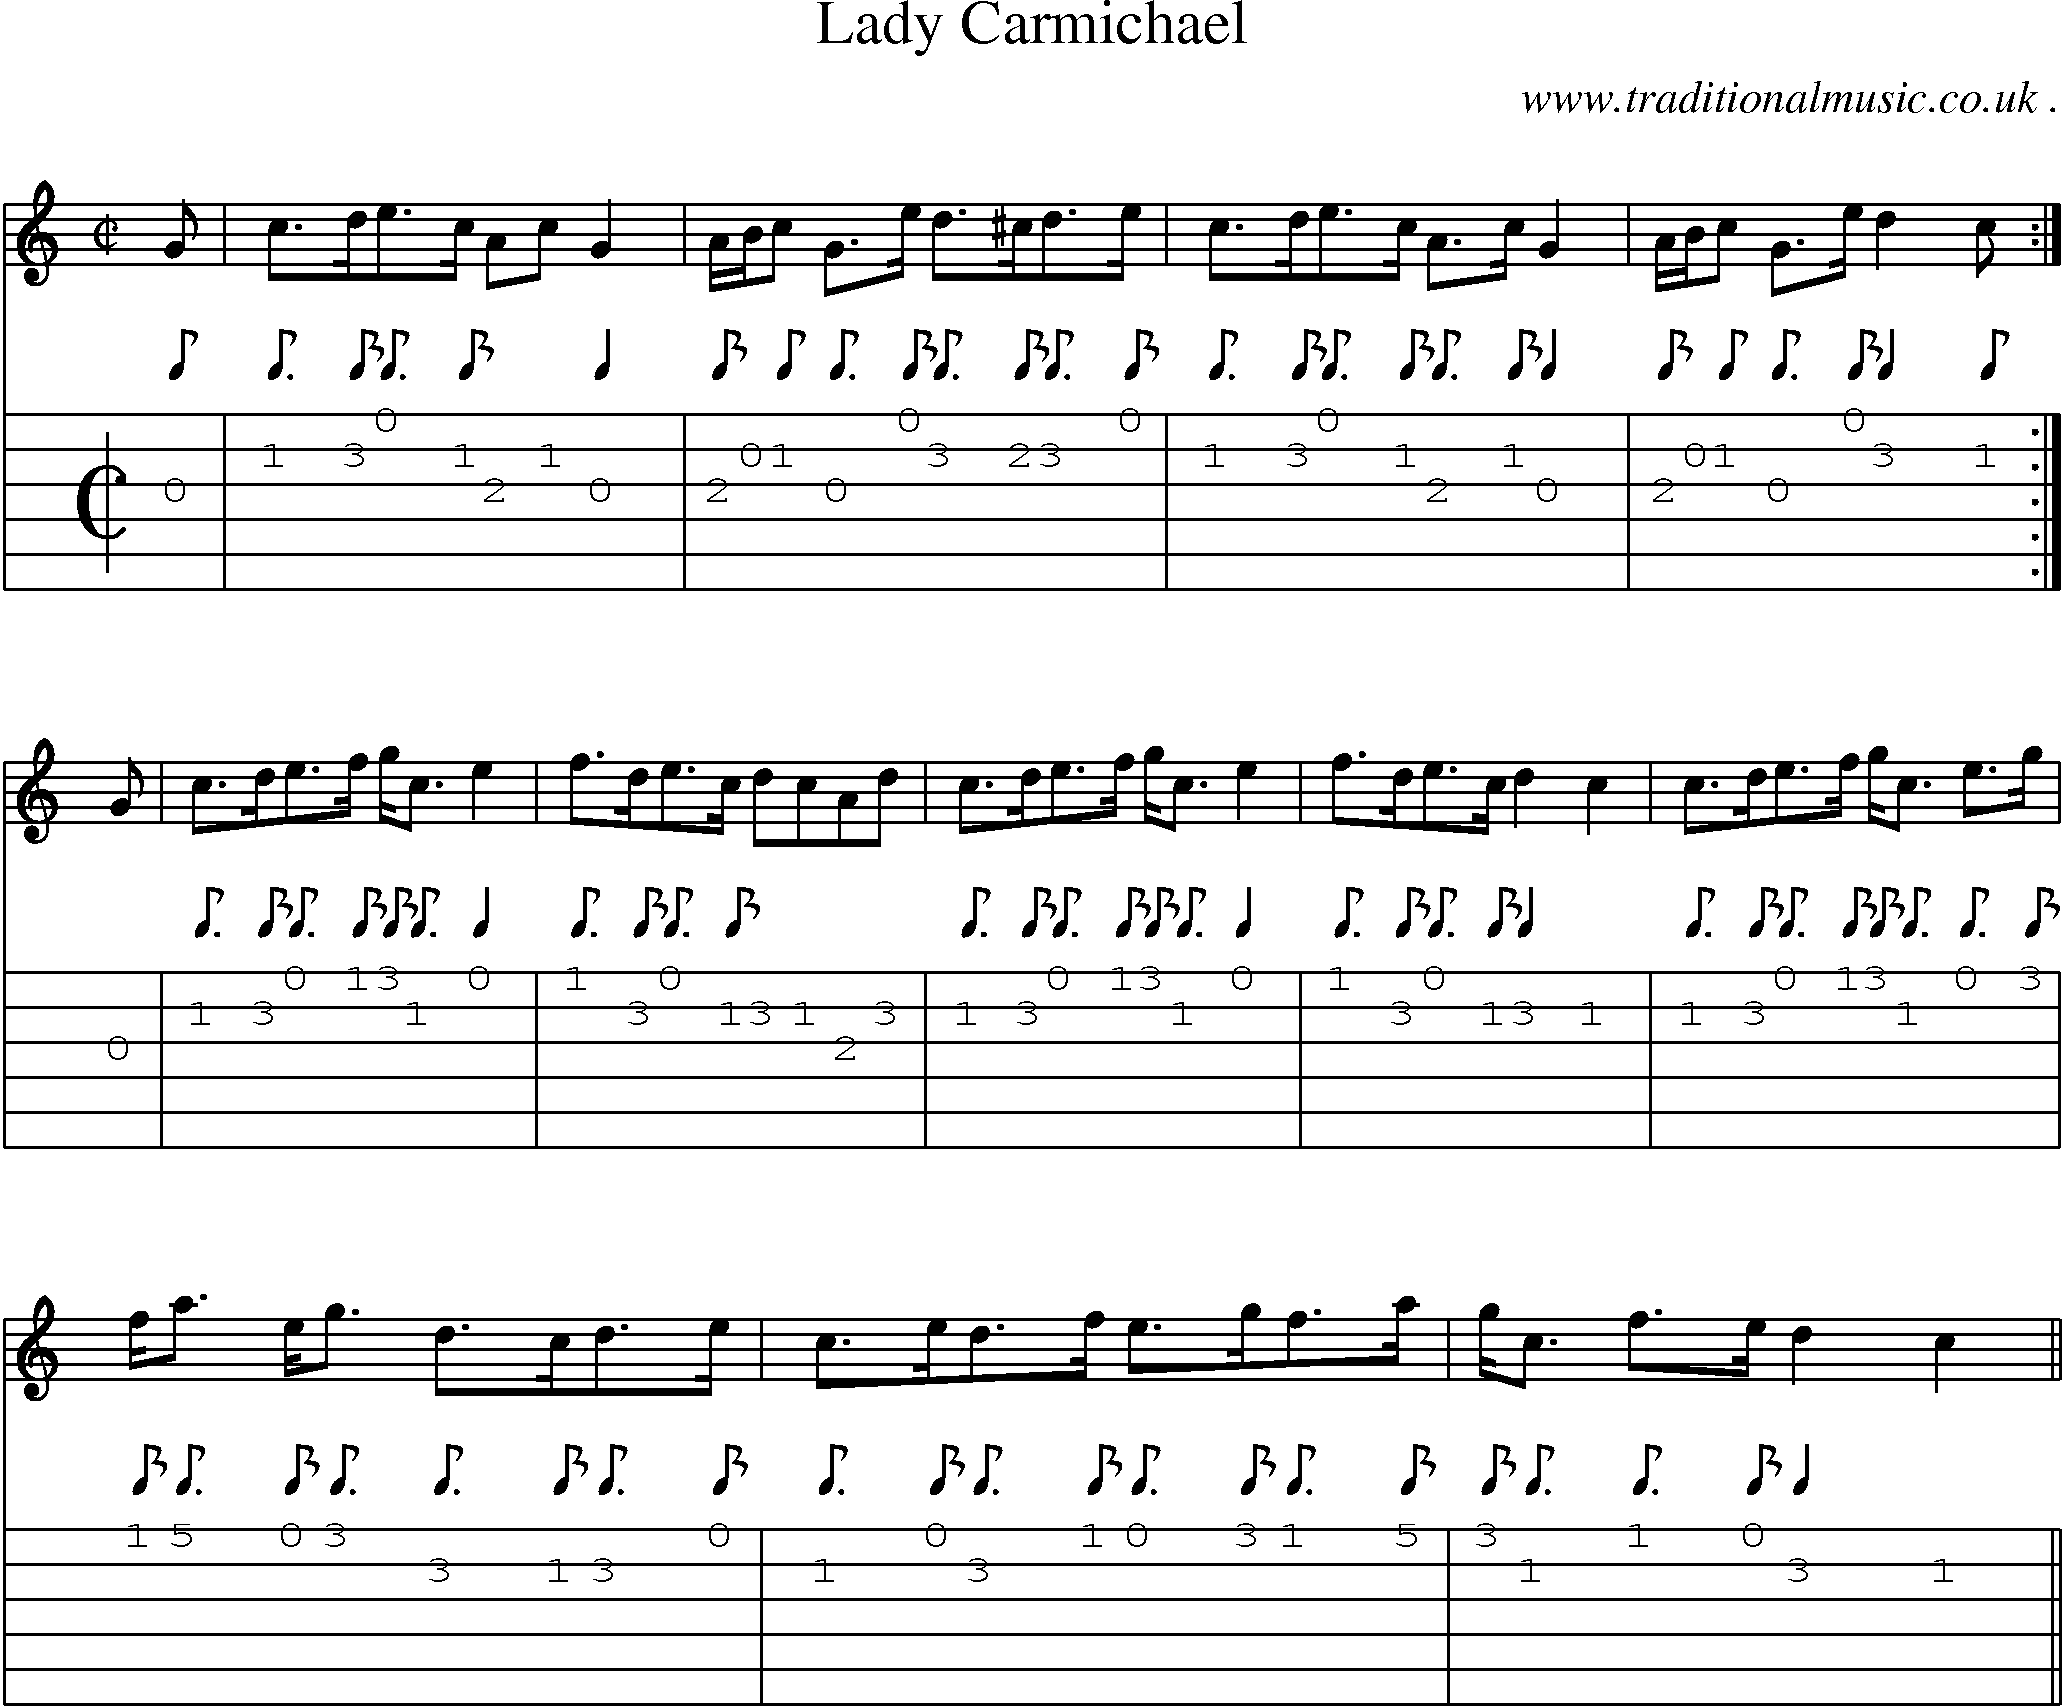 Sheet-music  score, Chords and Guitar Tabs for Lady Carmichael